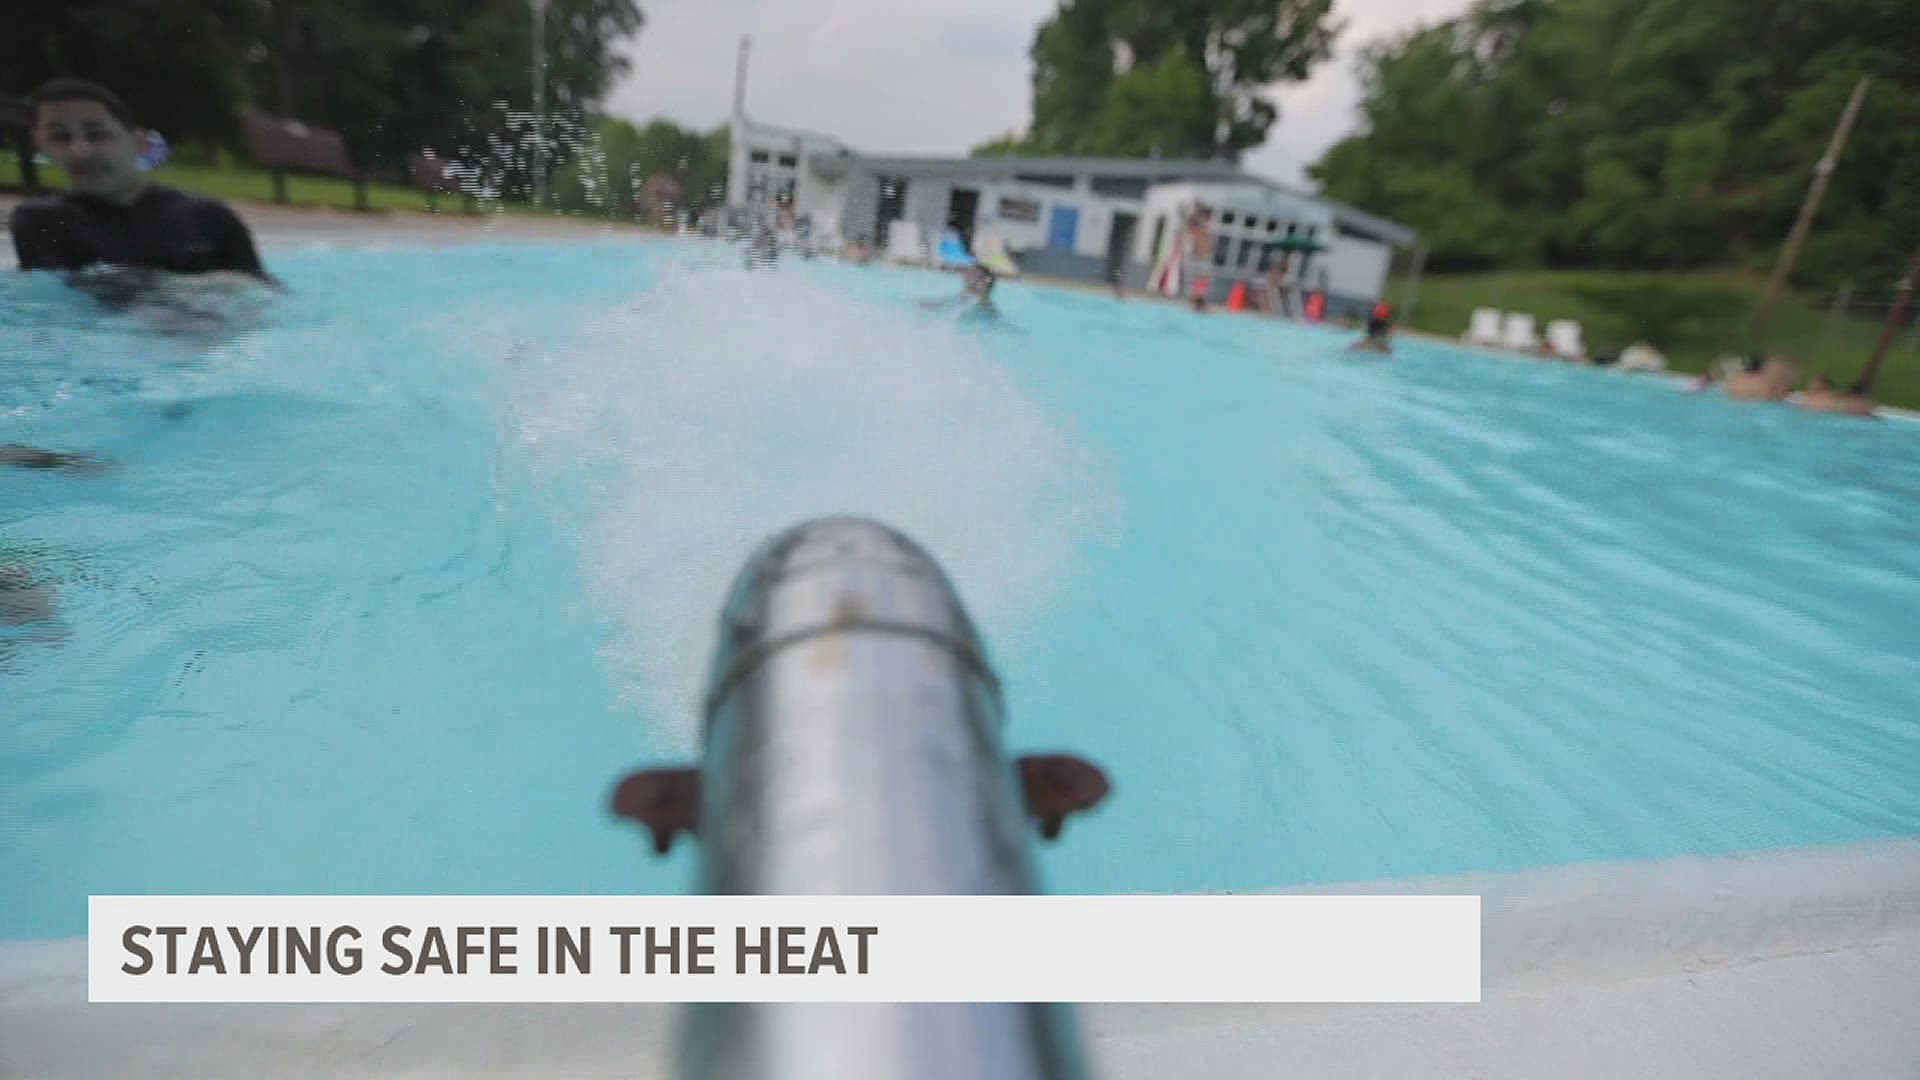 As temperatures soared into the mid-90's, officials set up cooling centers and families packed local pools to escape the heat.